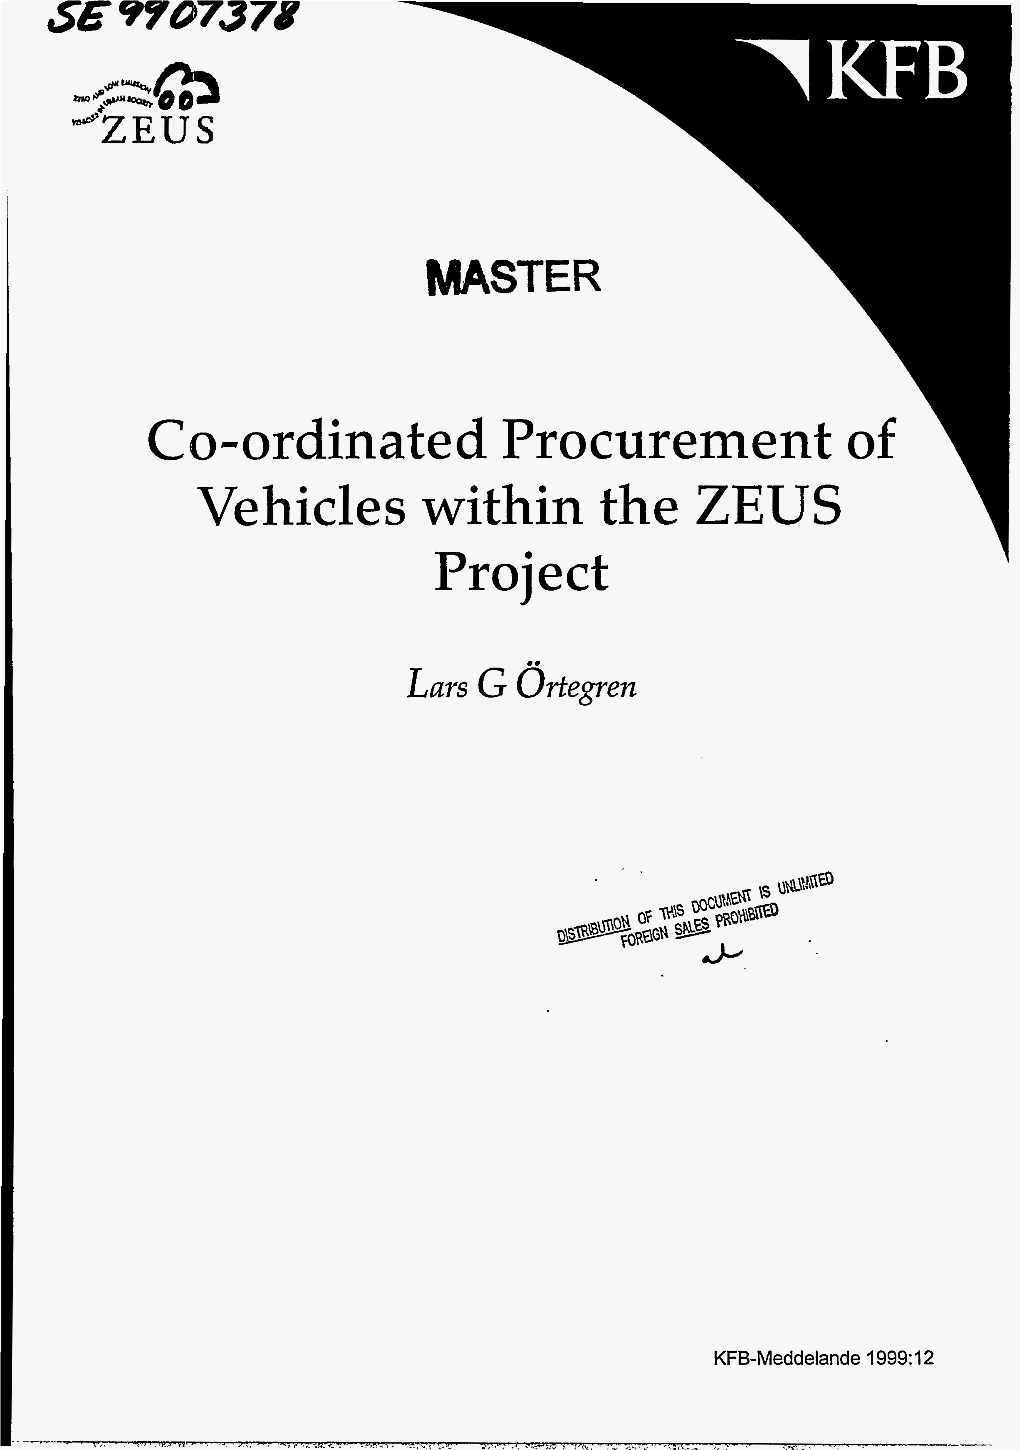 Co-Ordinated Procurement of Vehicles Within the ZEUS Project